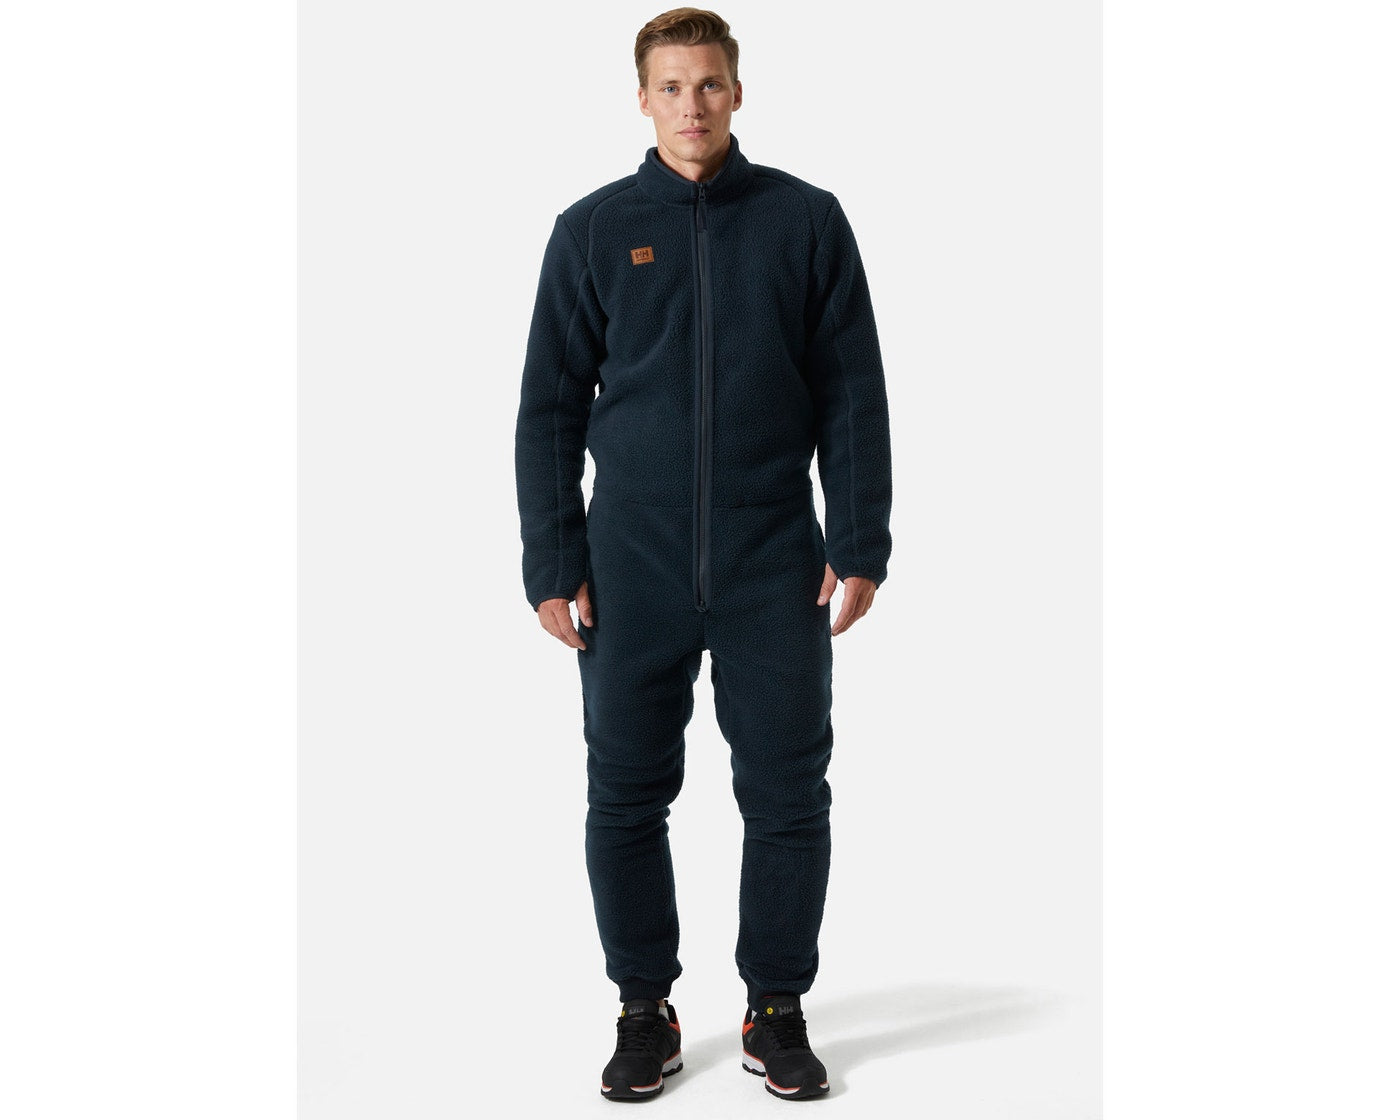 Helly Hansen Men's Pile Work Coveralls 72182 Heritage Recycled Fabric One Piece Elastic Waist Sizes S-4XL